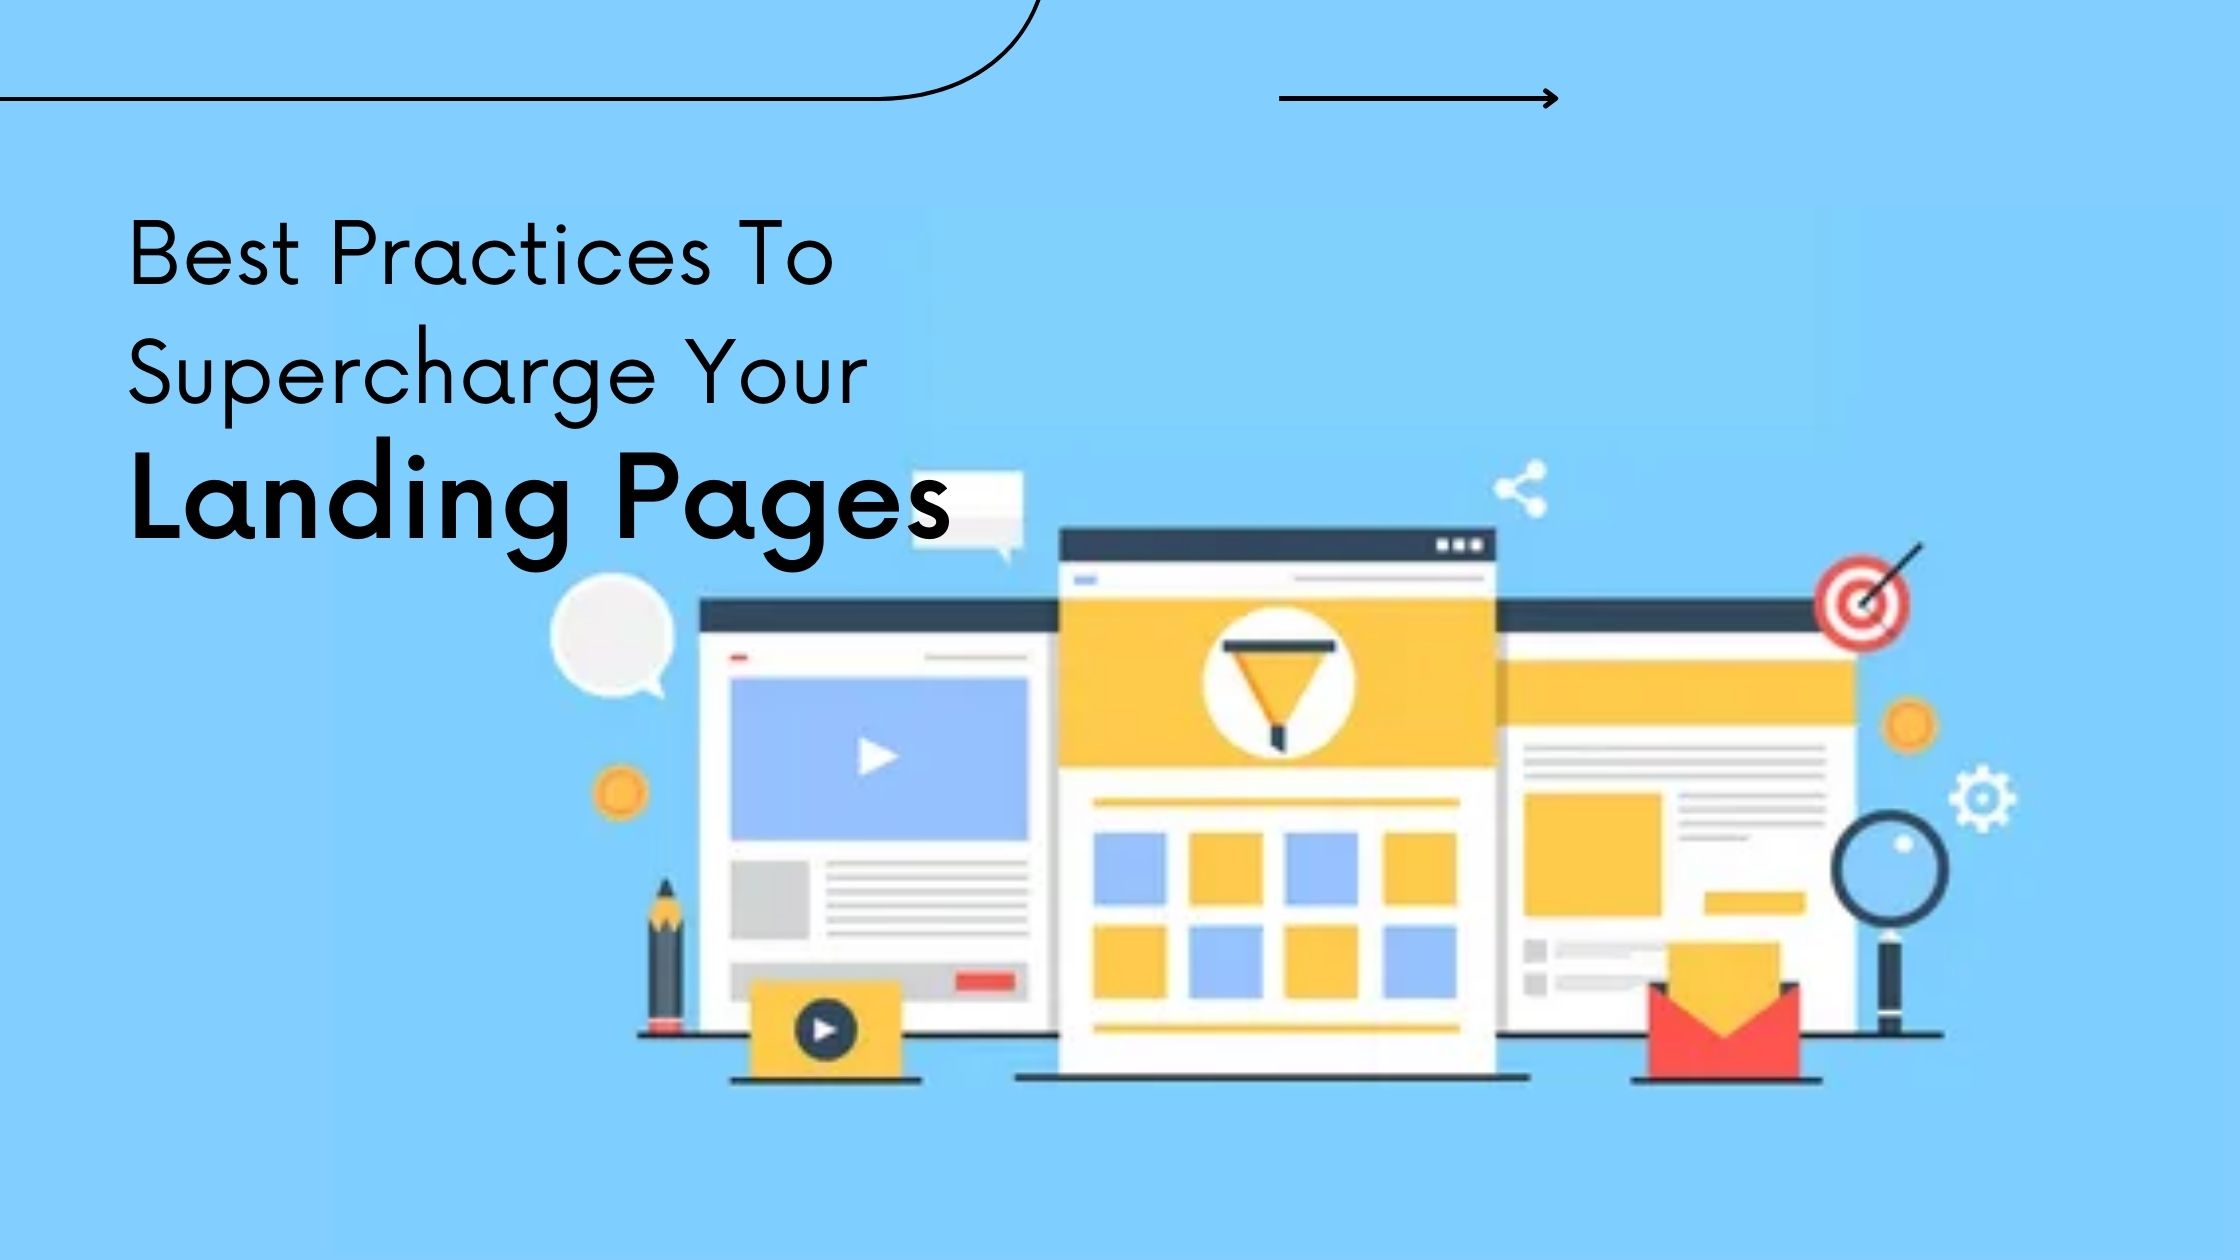 Best Practices To Supercharge Your Landing Pages